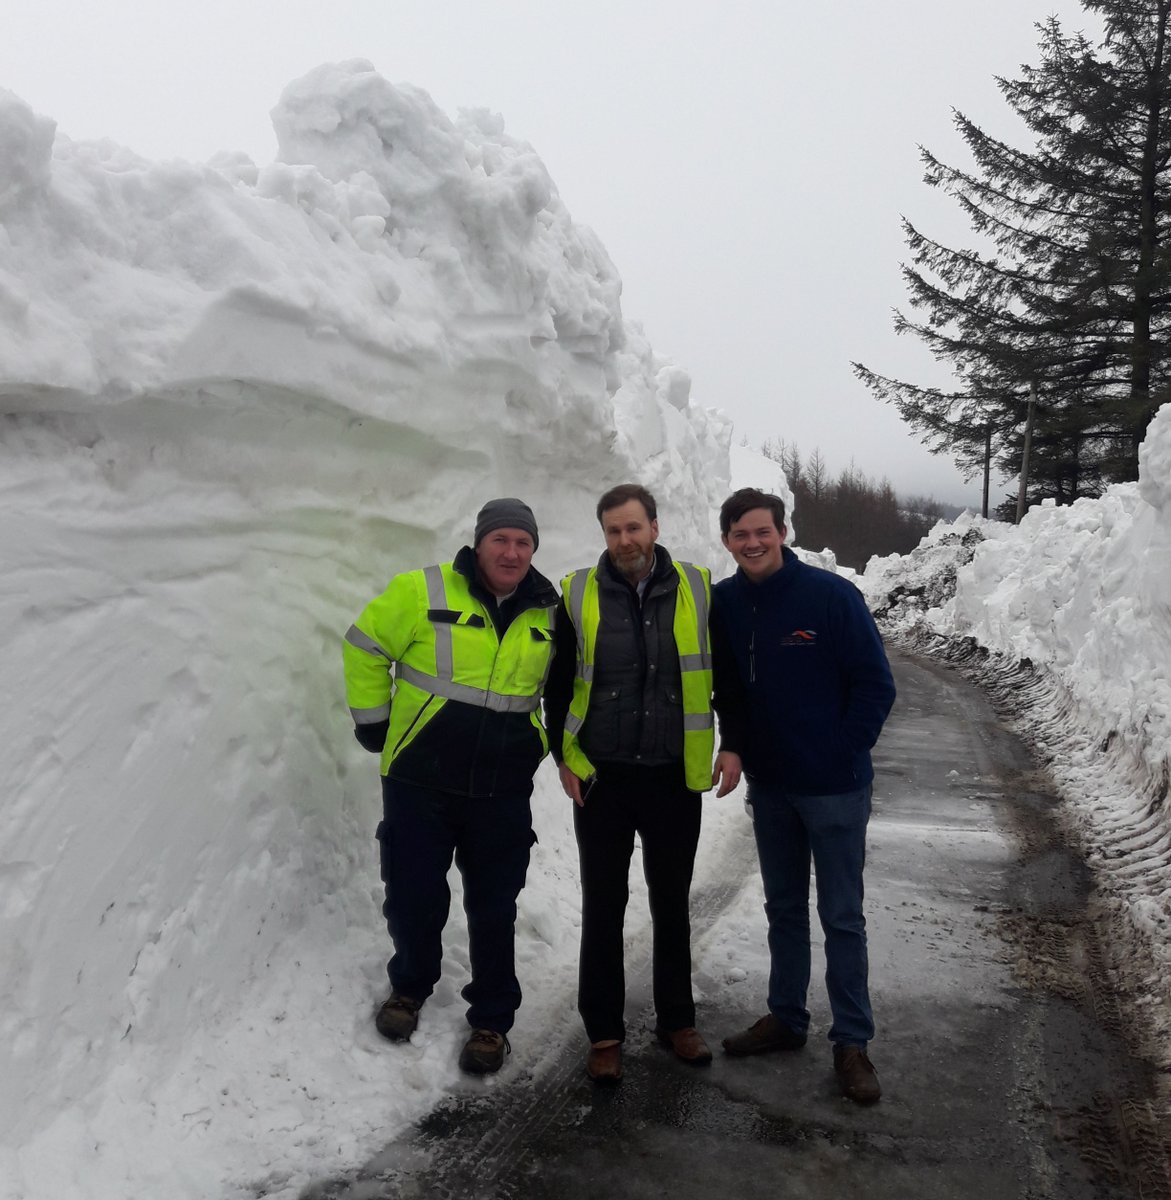 Most of us are through #StormEmma now but our crews are still clearing the way in rural parts of the county. This was taken today on the Shankhill Road in the Ballinascorney area and gives an idea of the Trojan work being done up there!